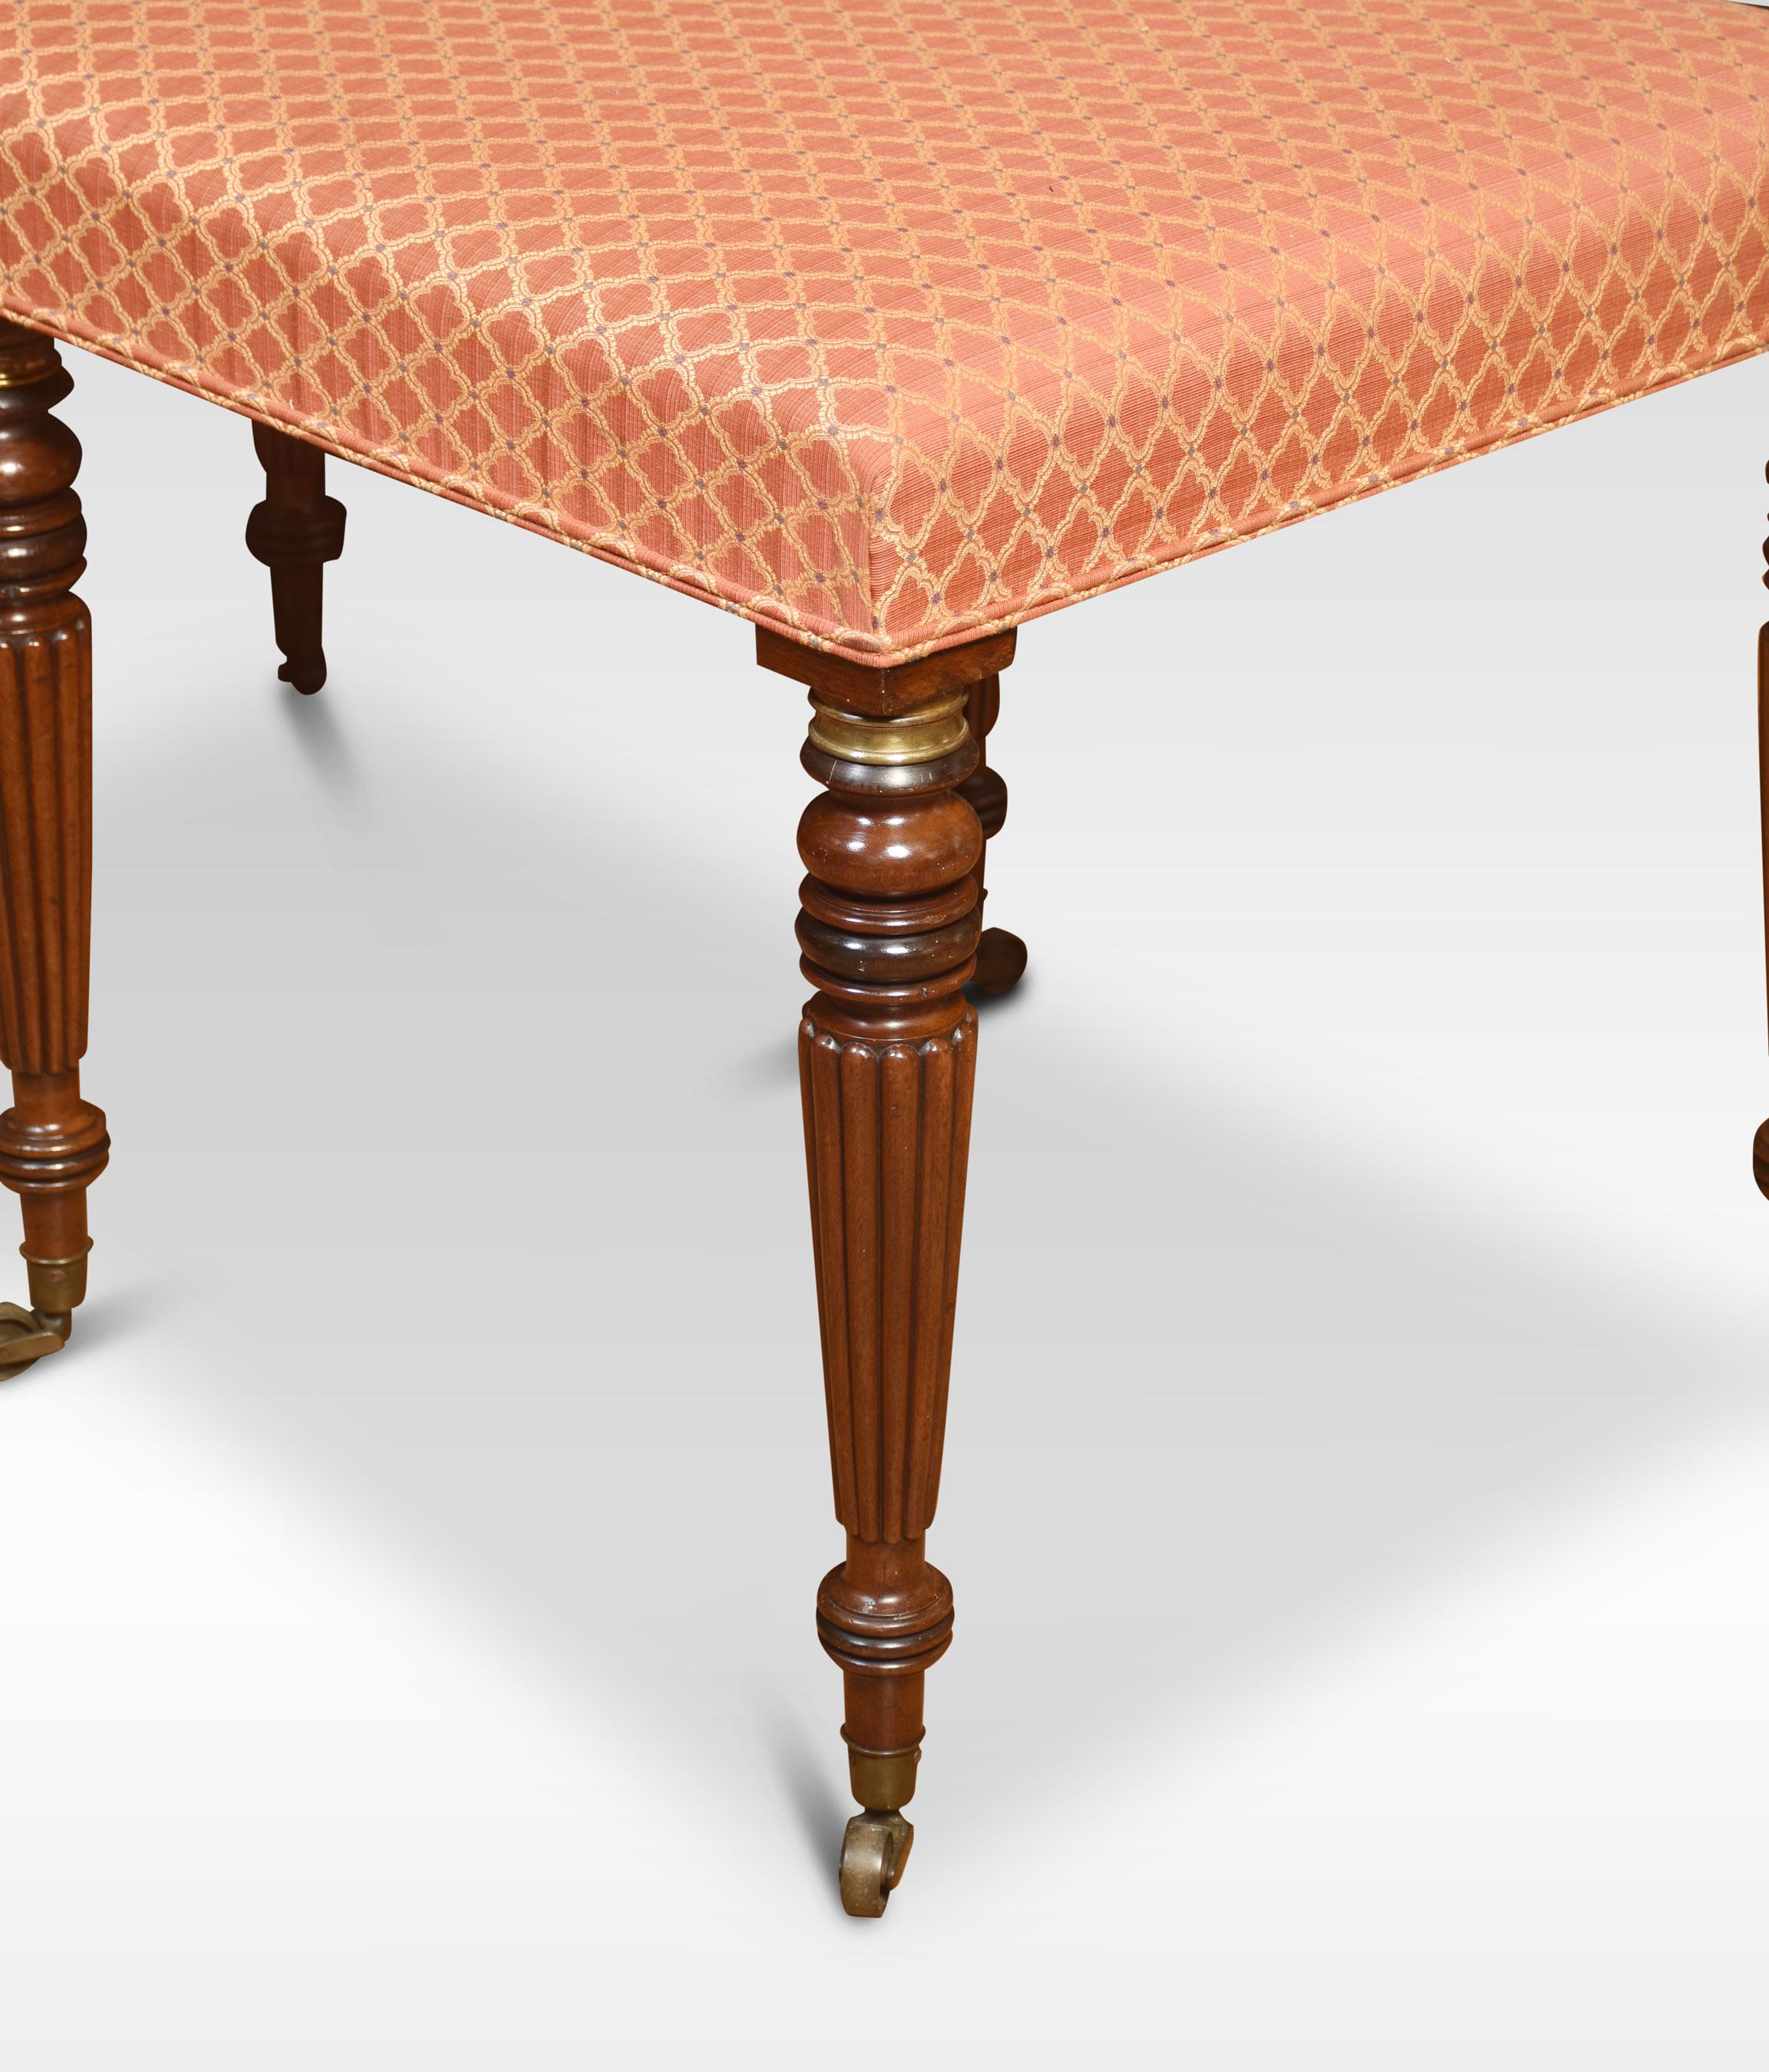 Large regency stool, the upholstered seat raised up on six mahogany turned reeded and fluted legs, terminating in brass castors.
Dimensions
Height 26.5 Inches
Width 49 Inches
Depth 27 Inches.